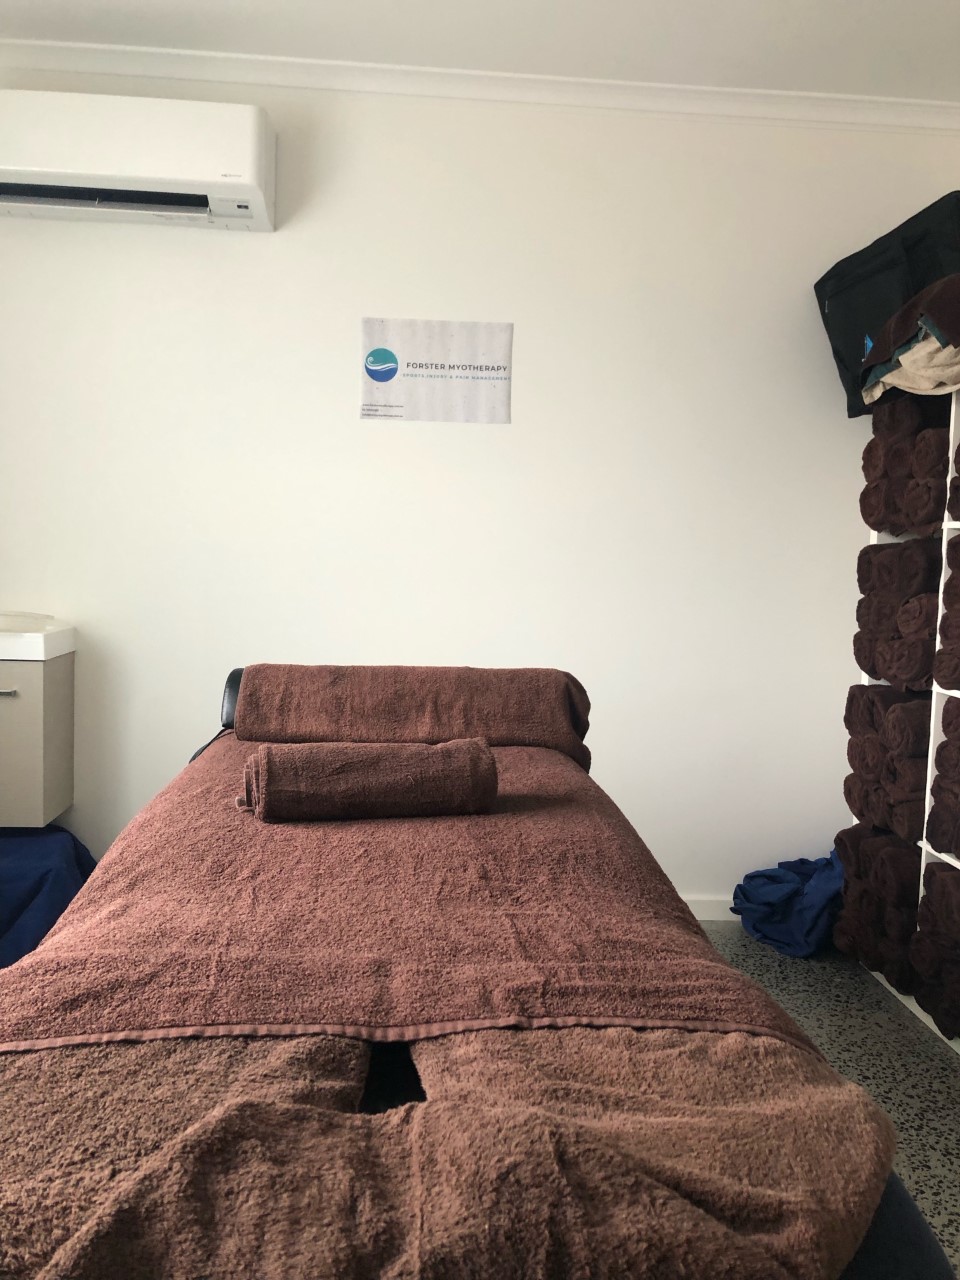 Forster Myotherapy |  | 3a/27-29 Wharf St, Forster NSW 2428, Australia | 0255931265 OR +61 2 5593 1265